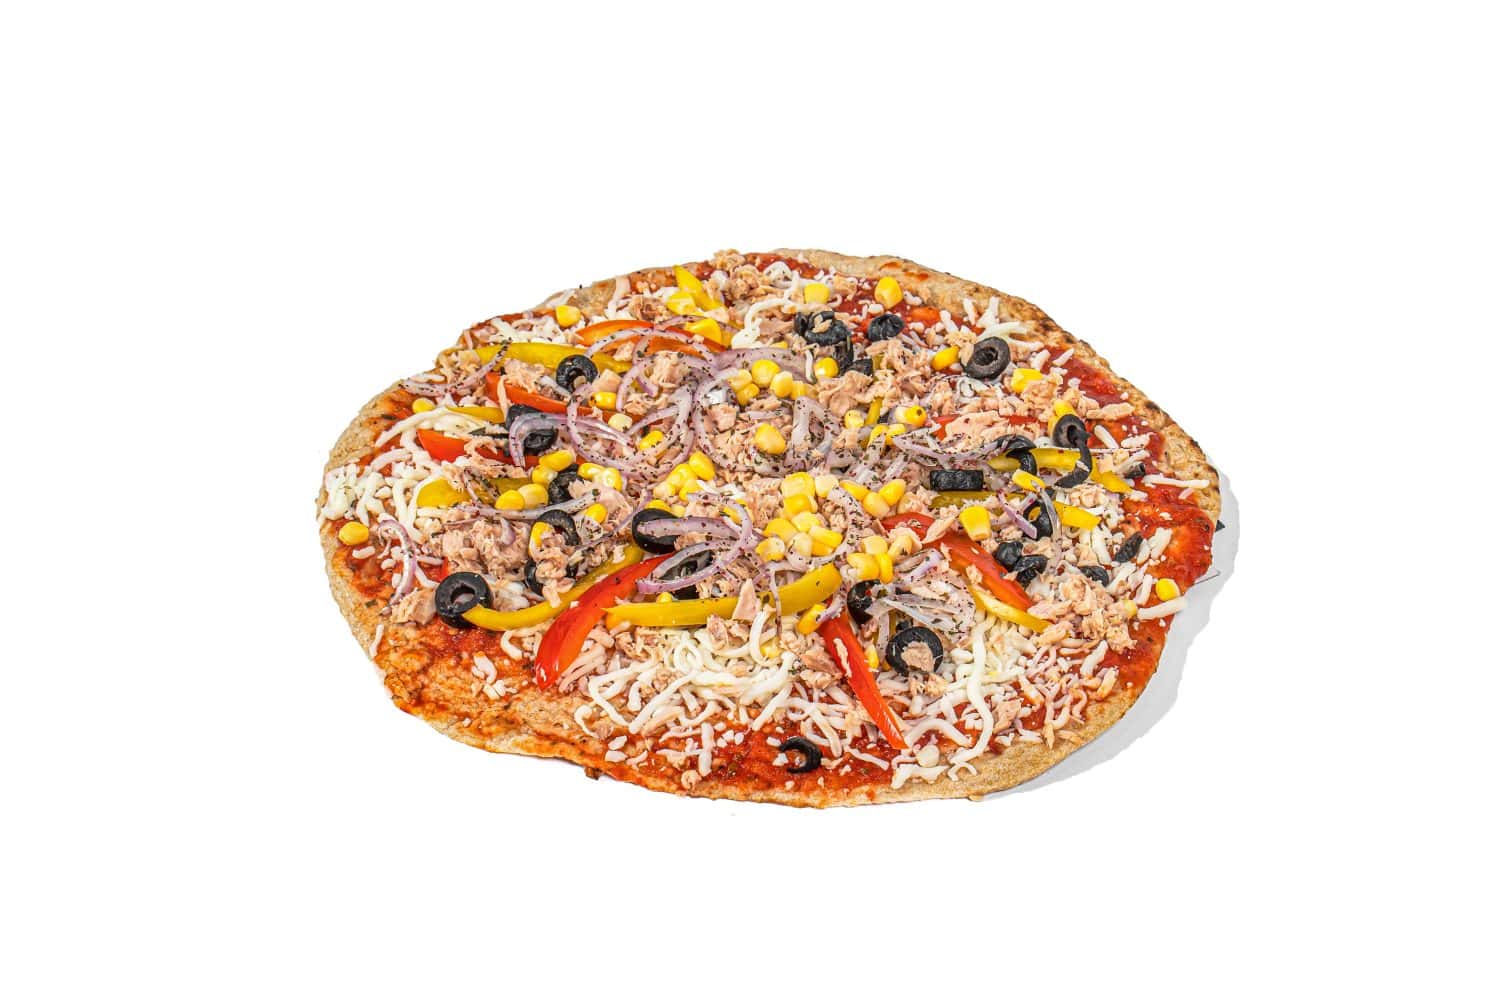 shrimp salmon pizza in high resolution image and isolated in white with blurry ends